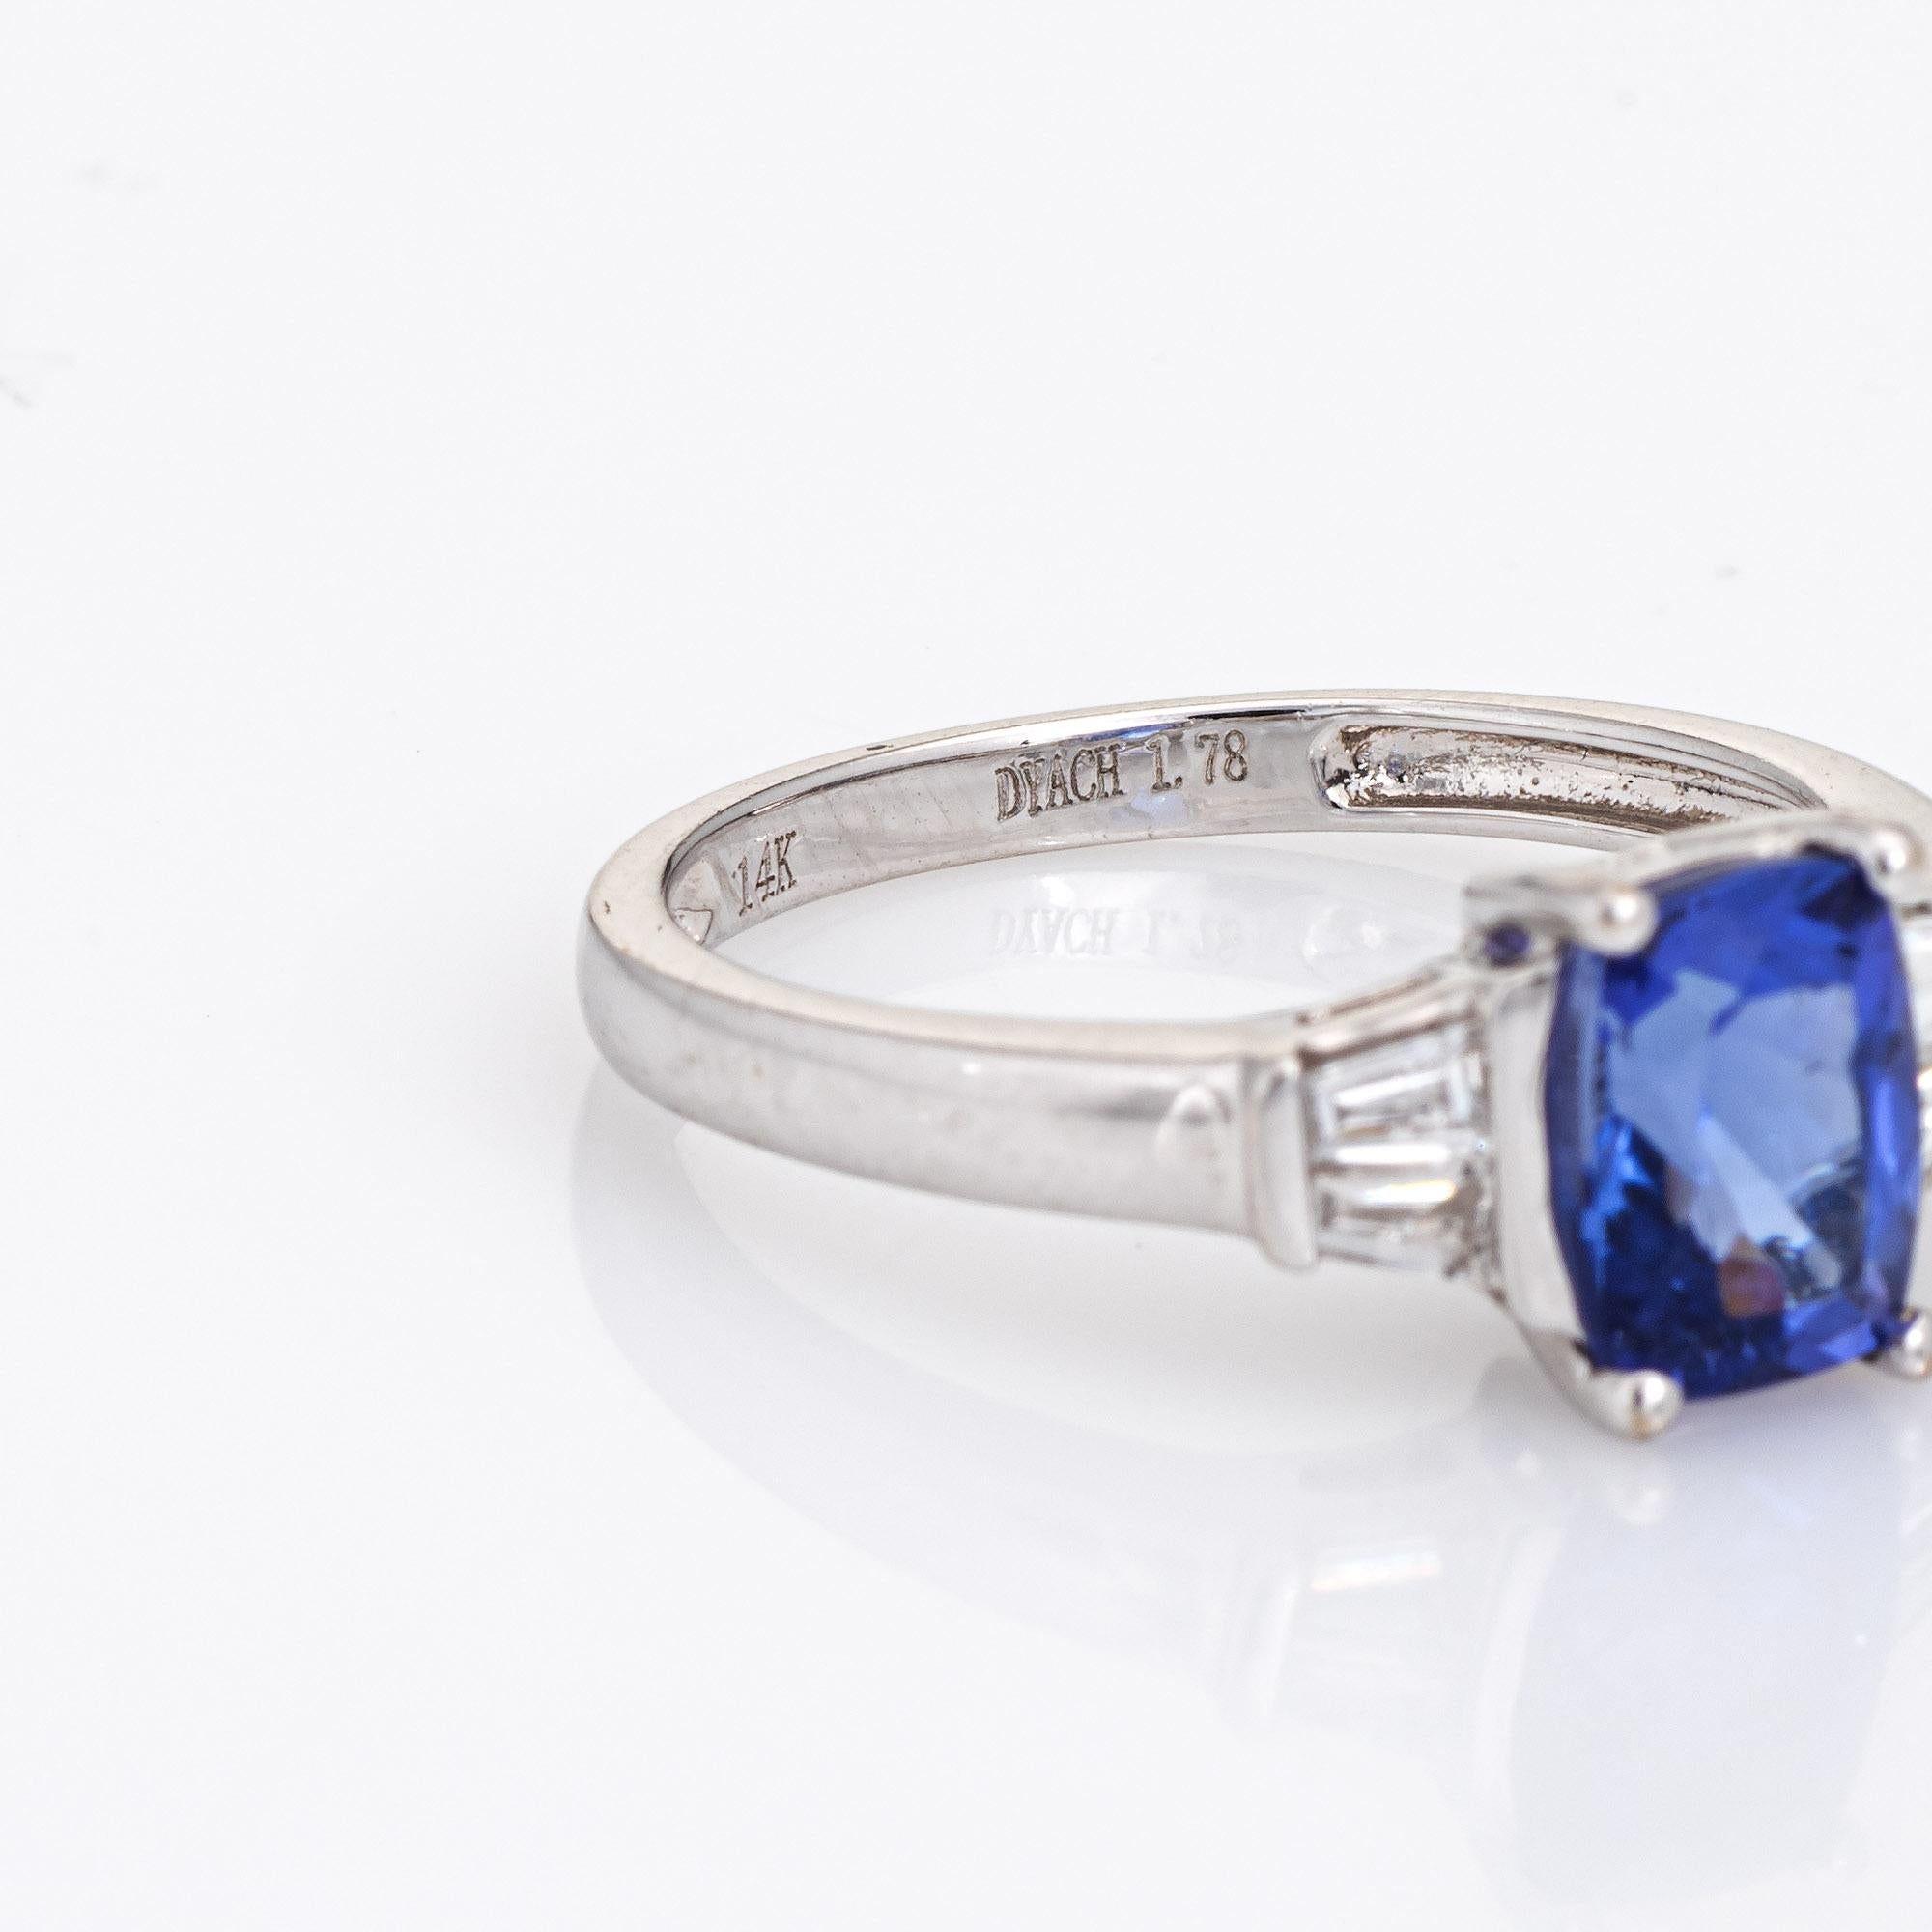 1.78ct Tanzanite Diamond Ring Gemstone Engagement Estate 14k White Gold In Good Condition For Sale In Torrance, CA